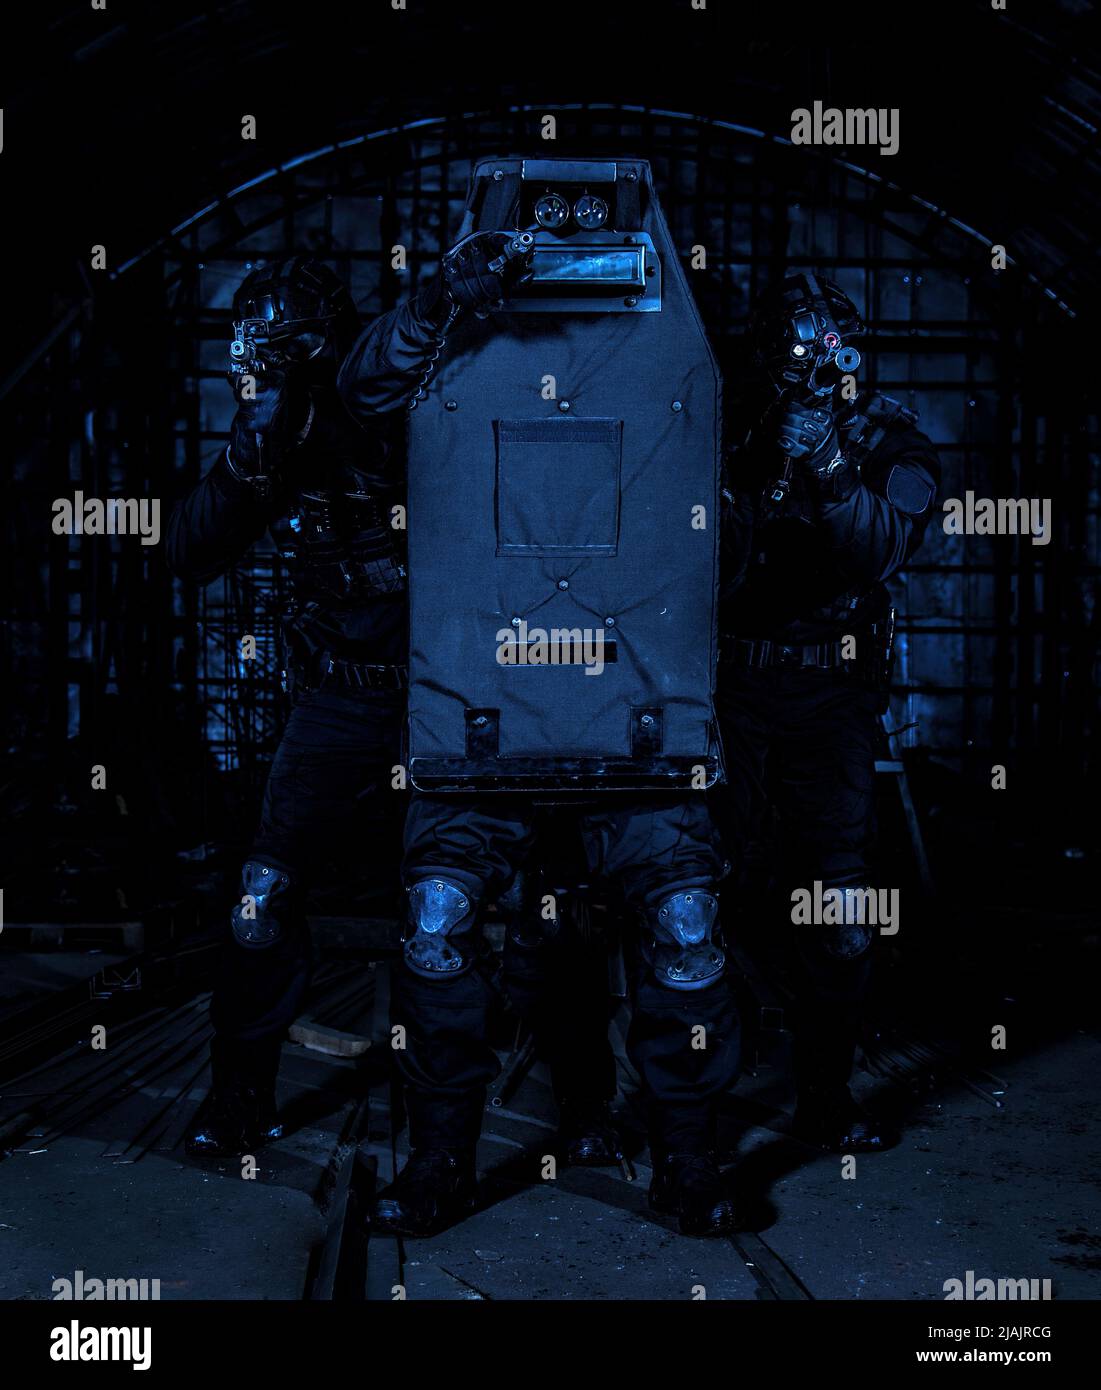 SWAT team members hiding behind ballistic shield, aiming their weapons. Stock Photo